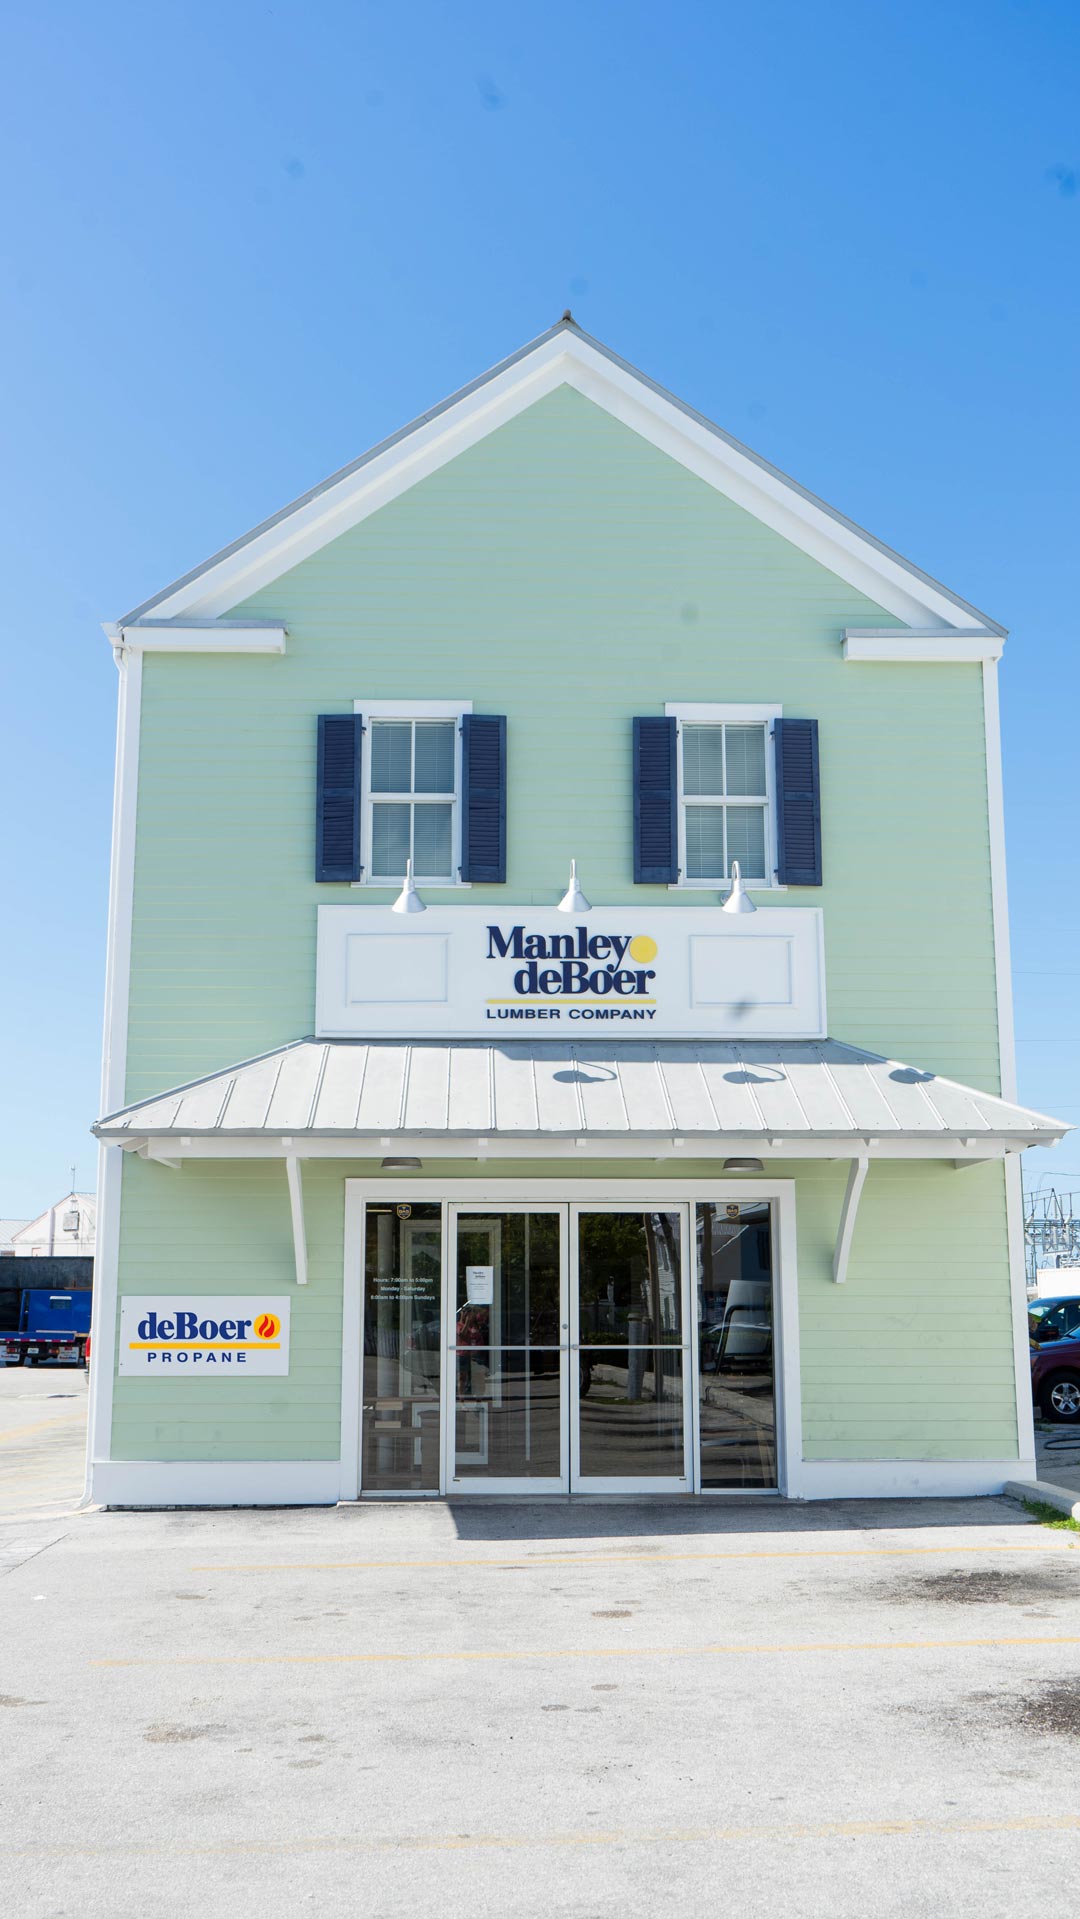 Image of Manley deBoer Lumber Company  Offices in Key West, Florida.  